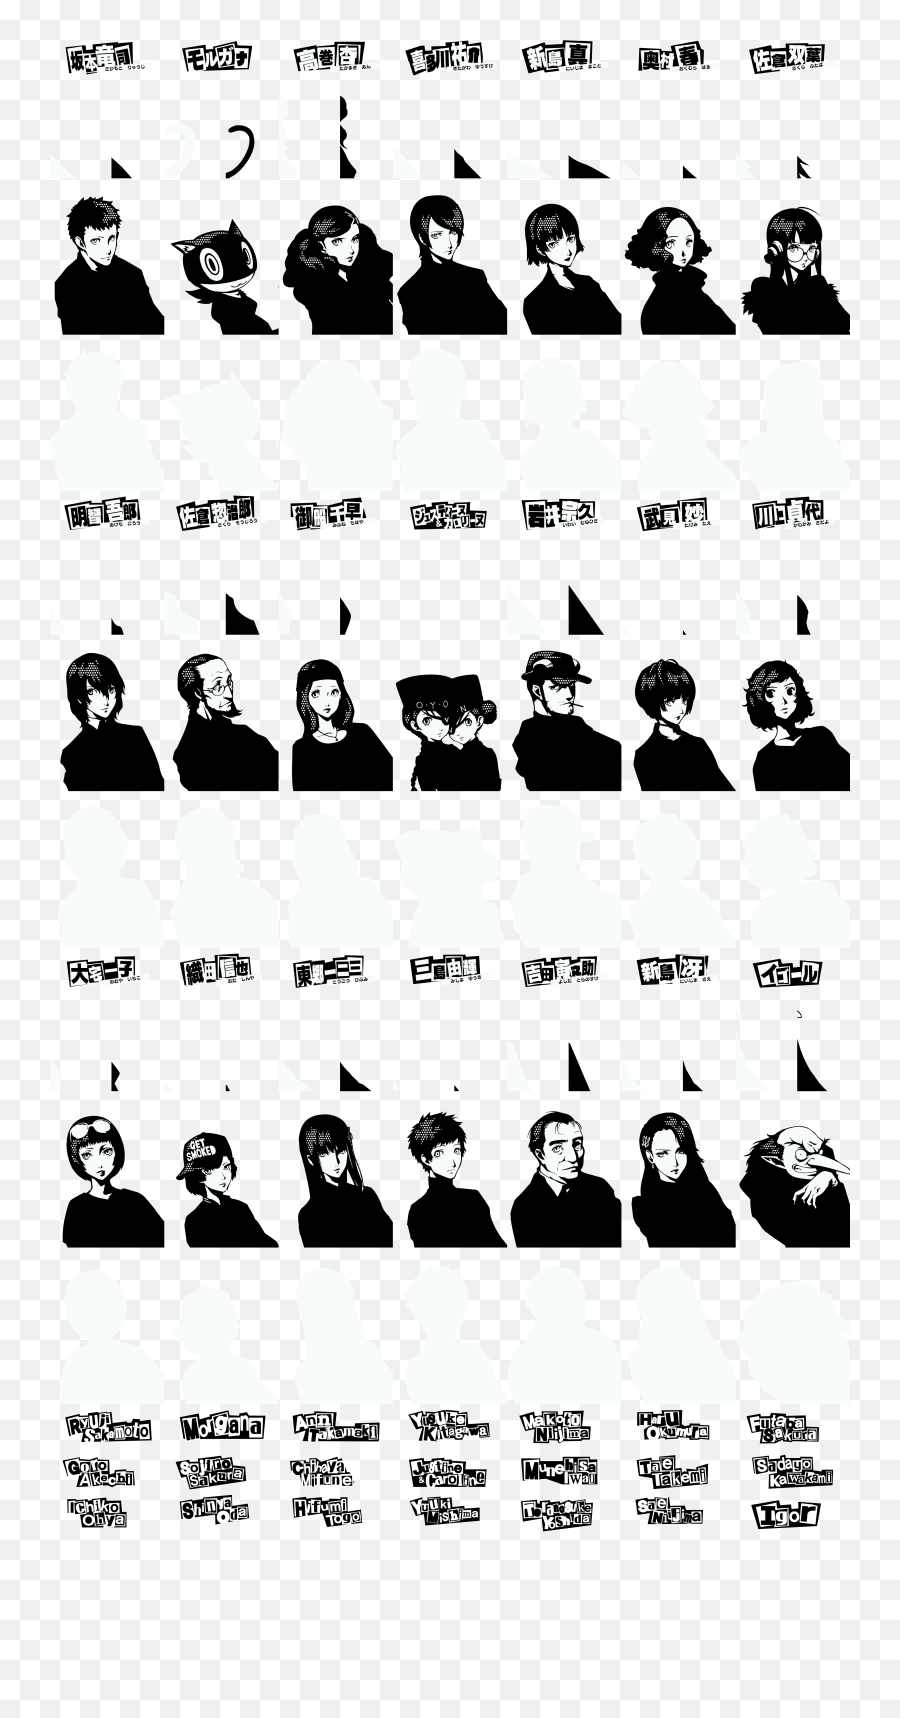 Persona 5 - For Adult Emoji,Persona 5 Png